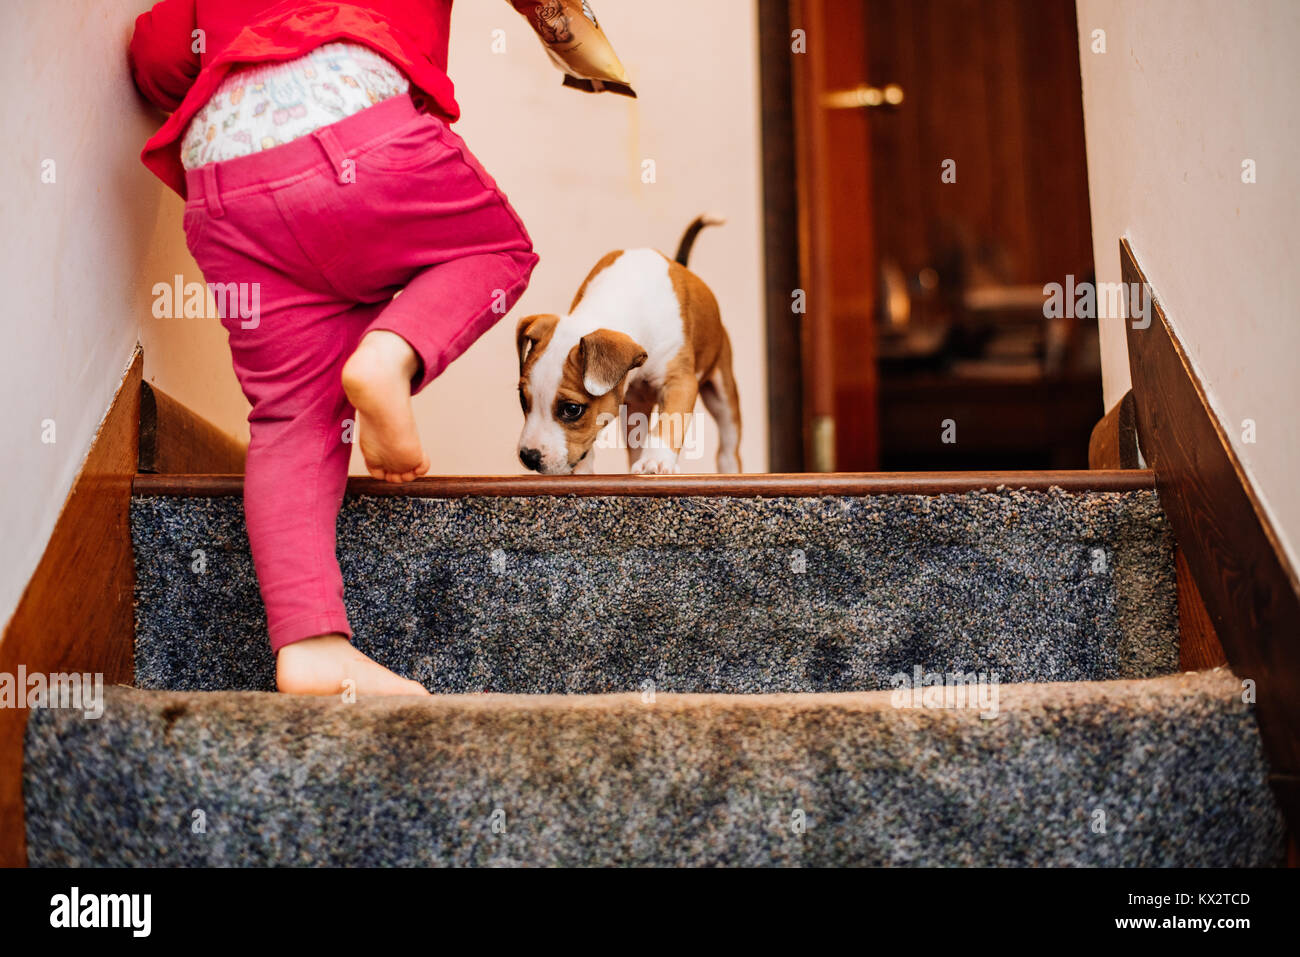 A toddler girl walks up the stairs while a puppy walks toward her. Stock Photo